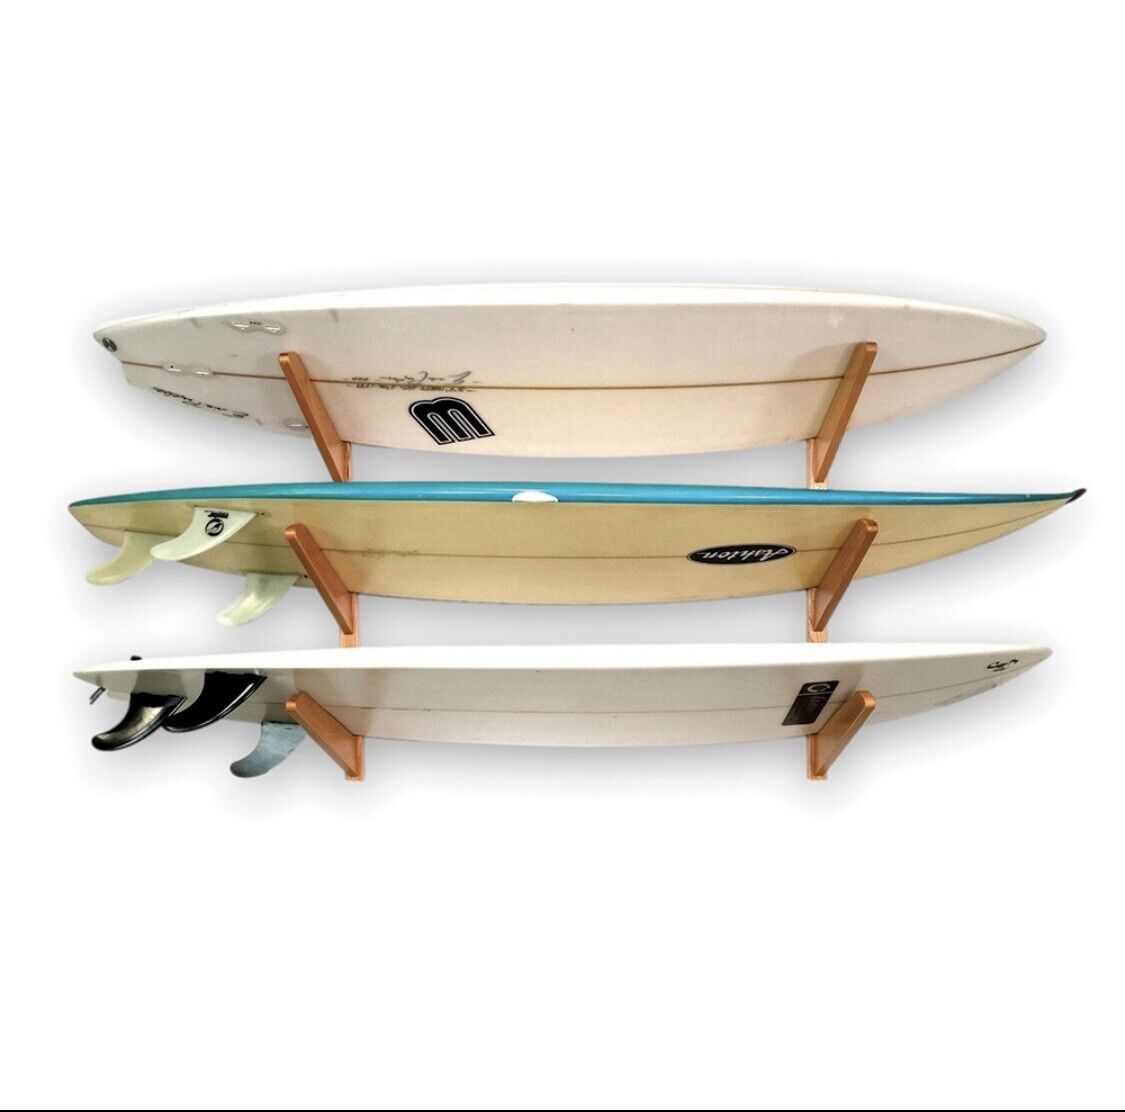 Timber Surfboard Wall Rack, Holds 3 Surfboards, Wood Home Storage Mount System